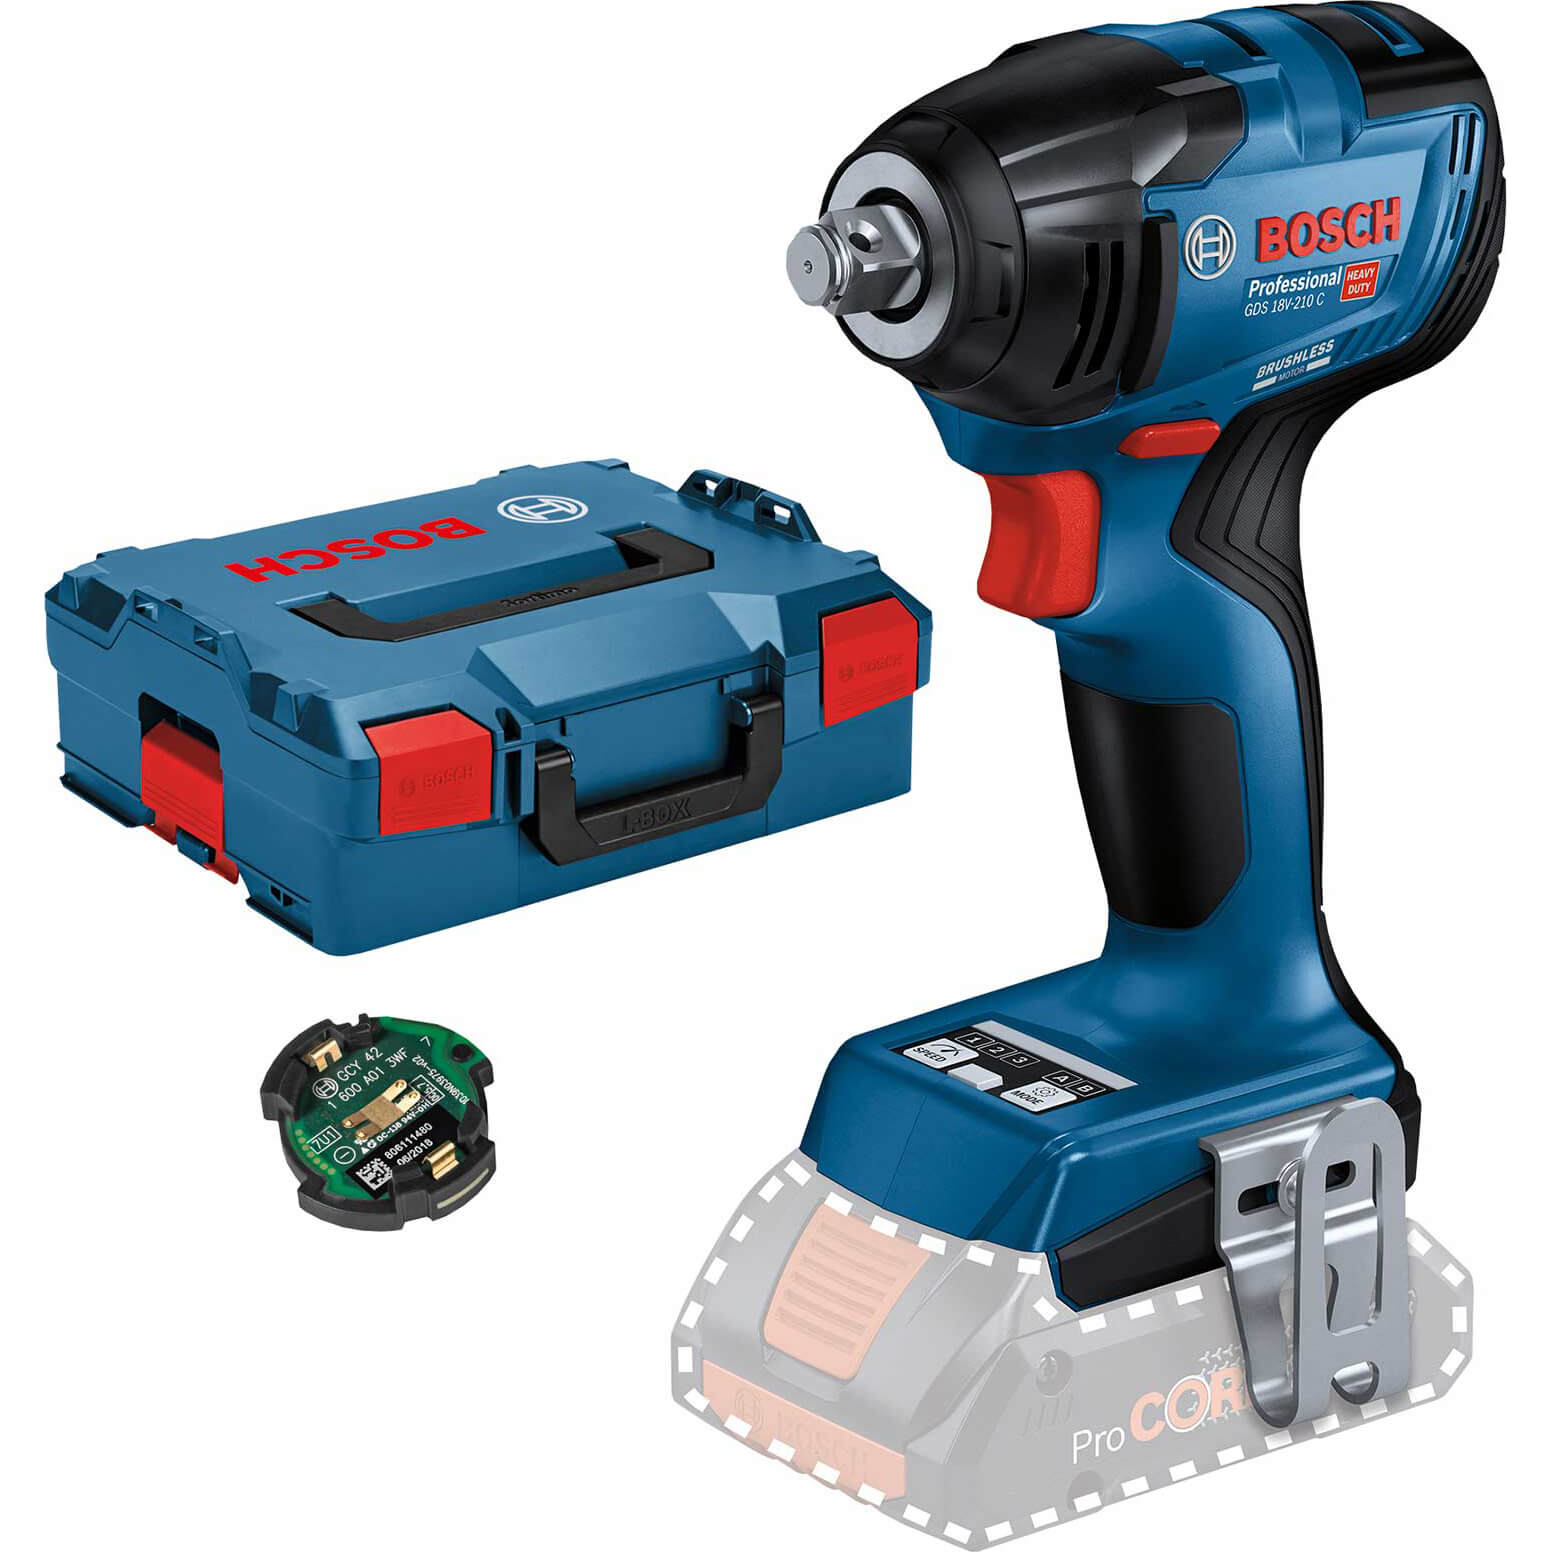 Bosch GDS 18V-210 C Connected 18v Cordless 1/2" Impact Wrench No Batteries No Charger Case